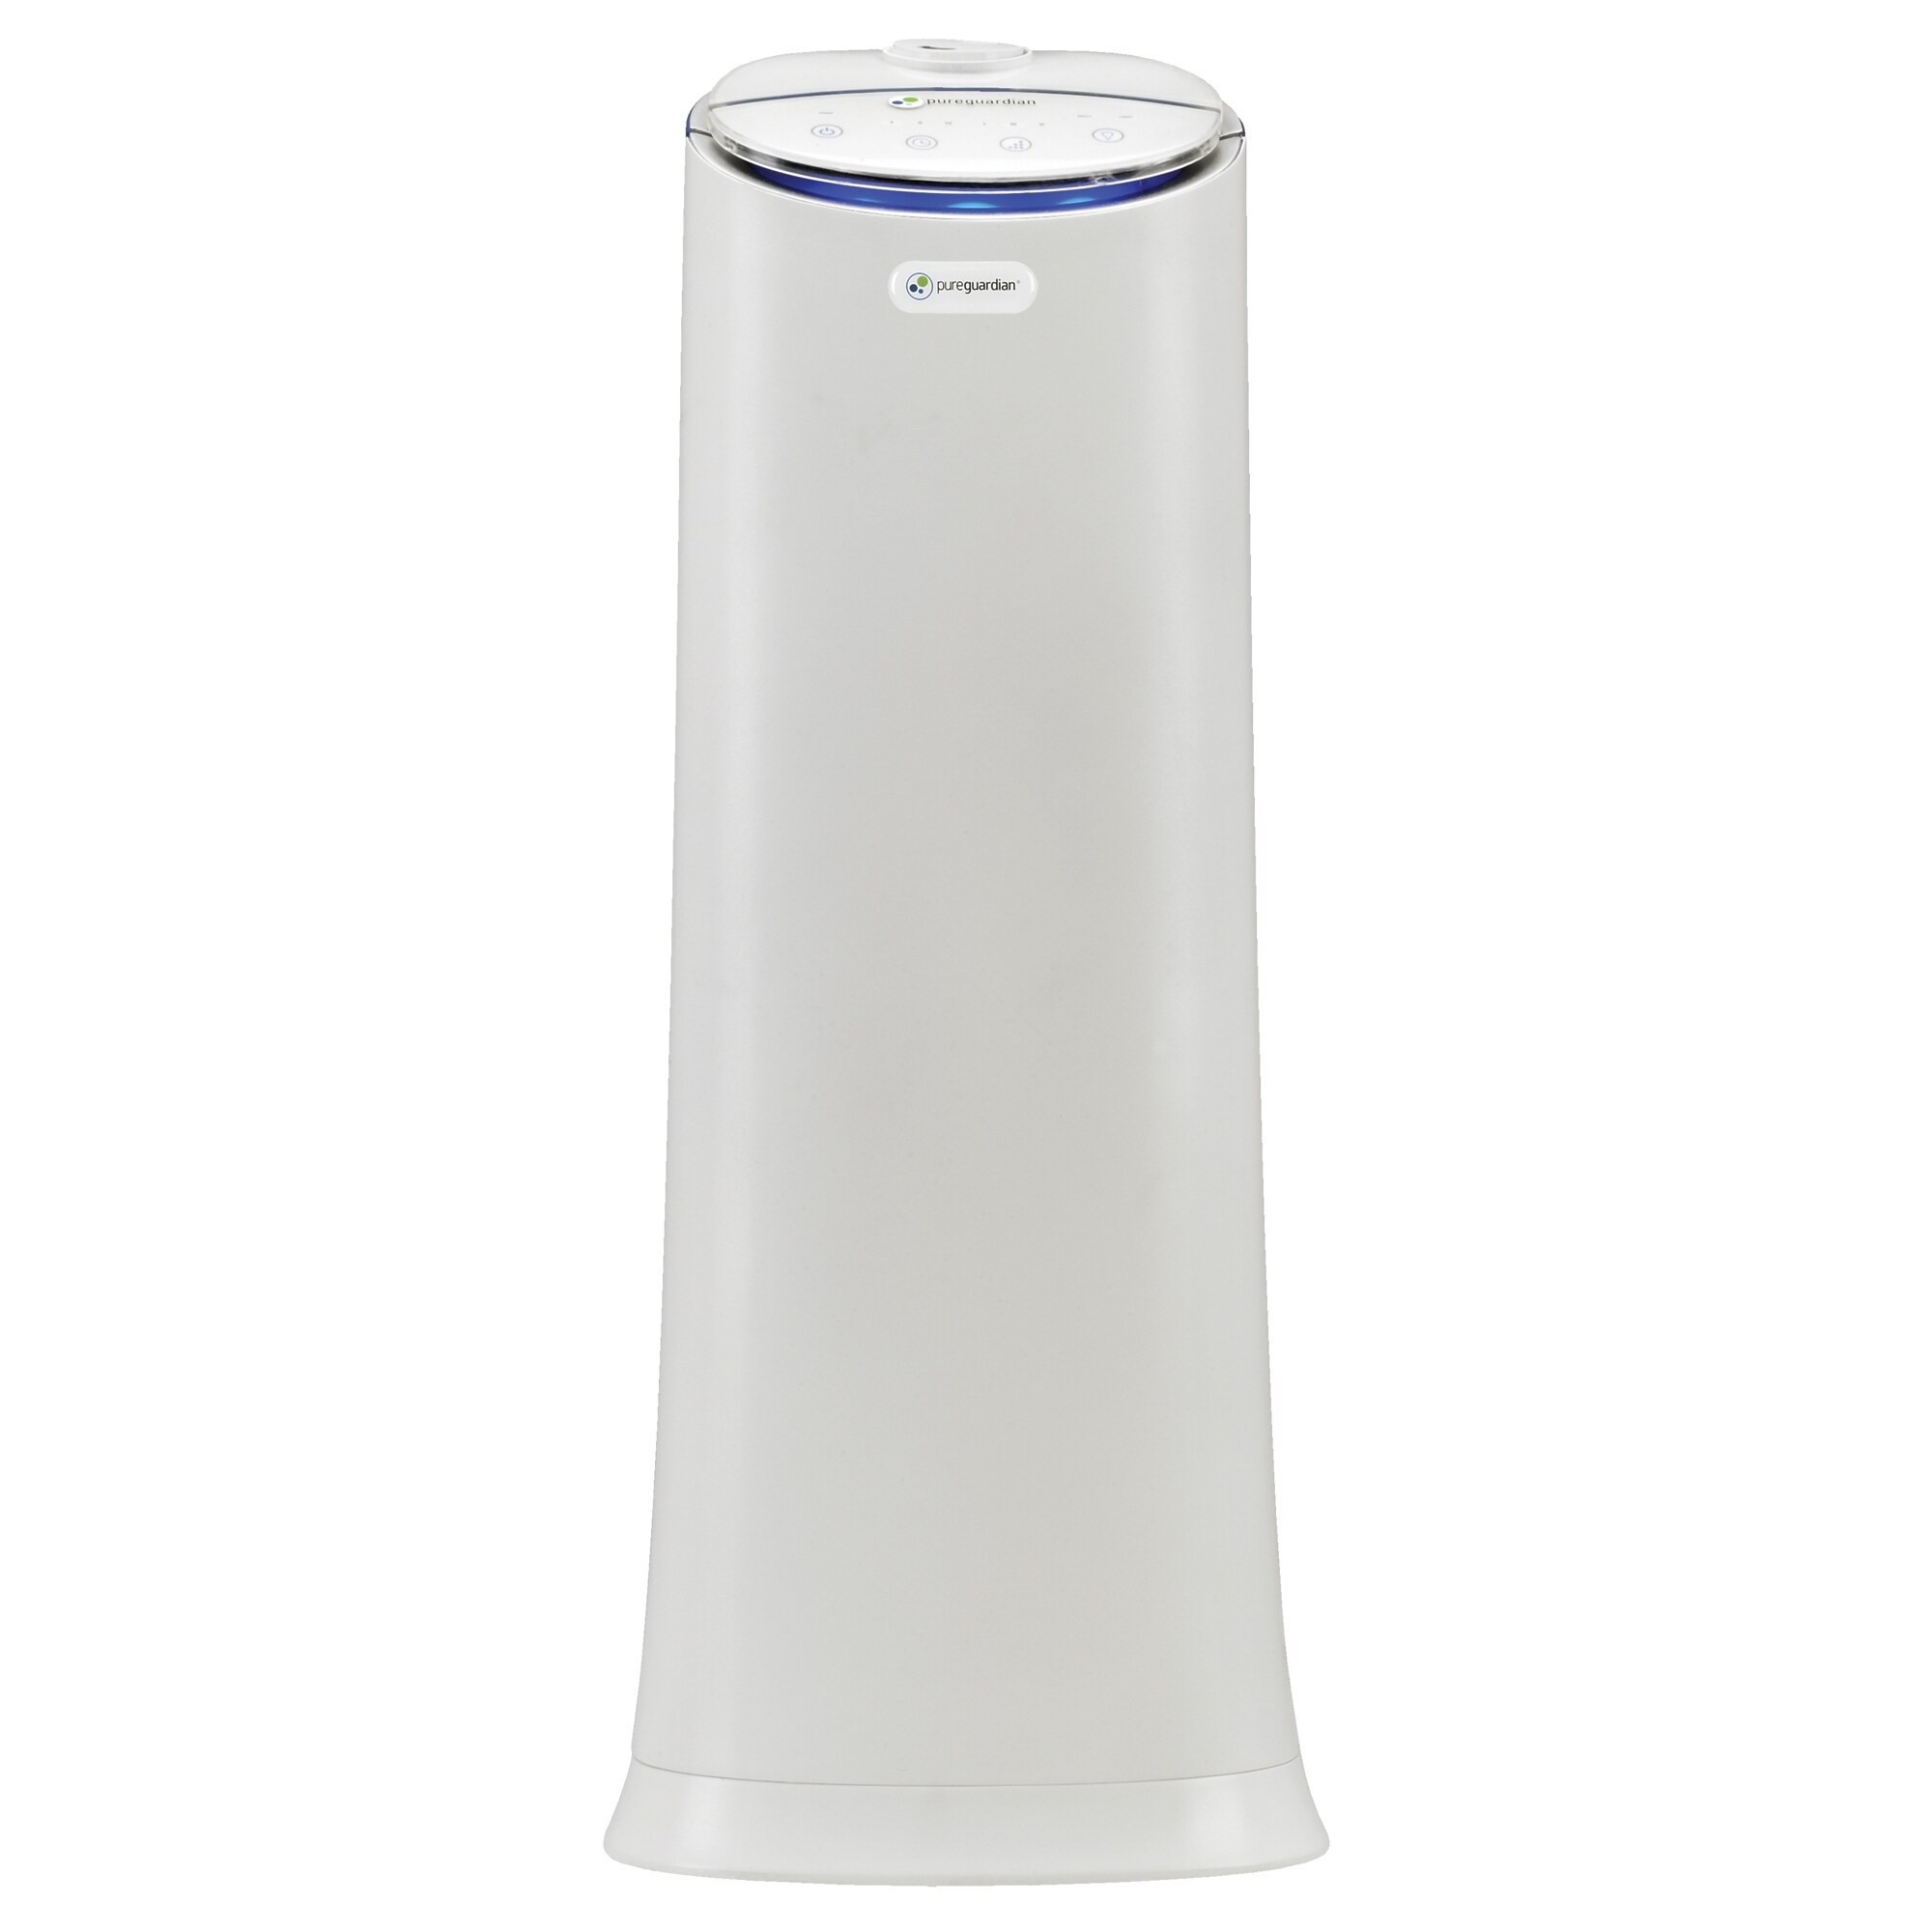 https://ak1.ostkcdn.com/images/products/24300134/PureGuardian-H3250WCA-100-Hour-Ultrasonic-Warm-and-Cool-Mist-Humidifier-Tower-with-Aromatherapy-Tray-1.5-Gallons-4459dfd9-00b8-4658-99cd-bfacddf5dcee.jpg